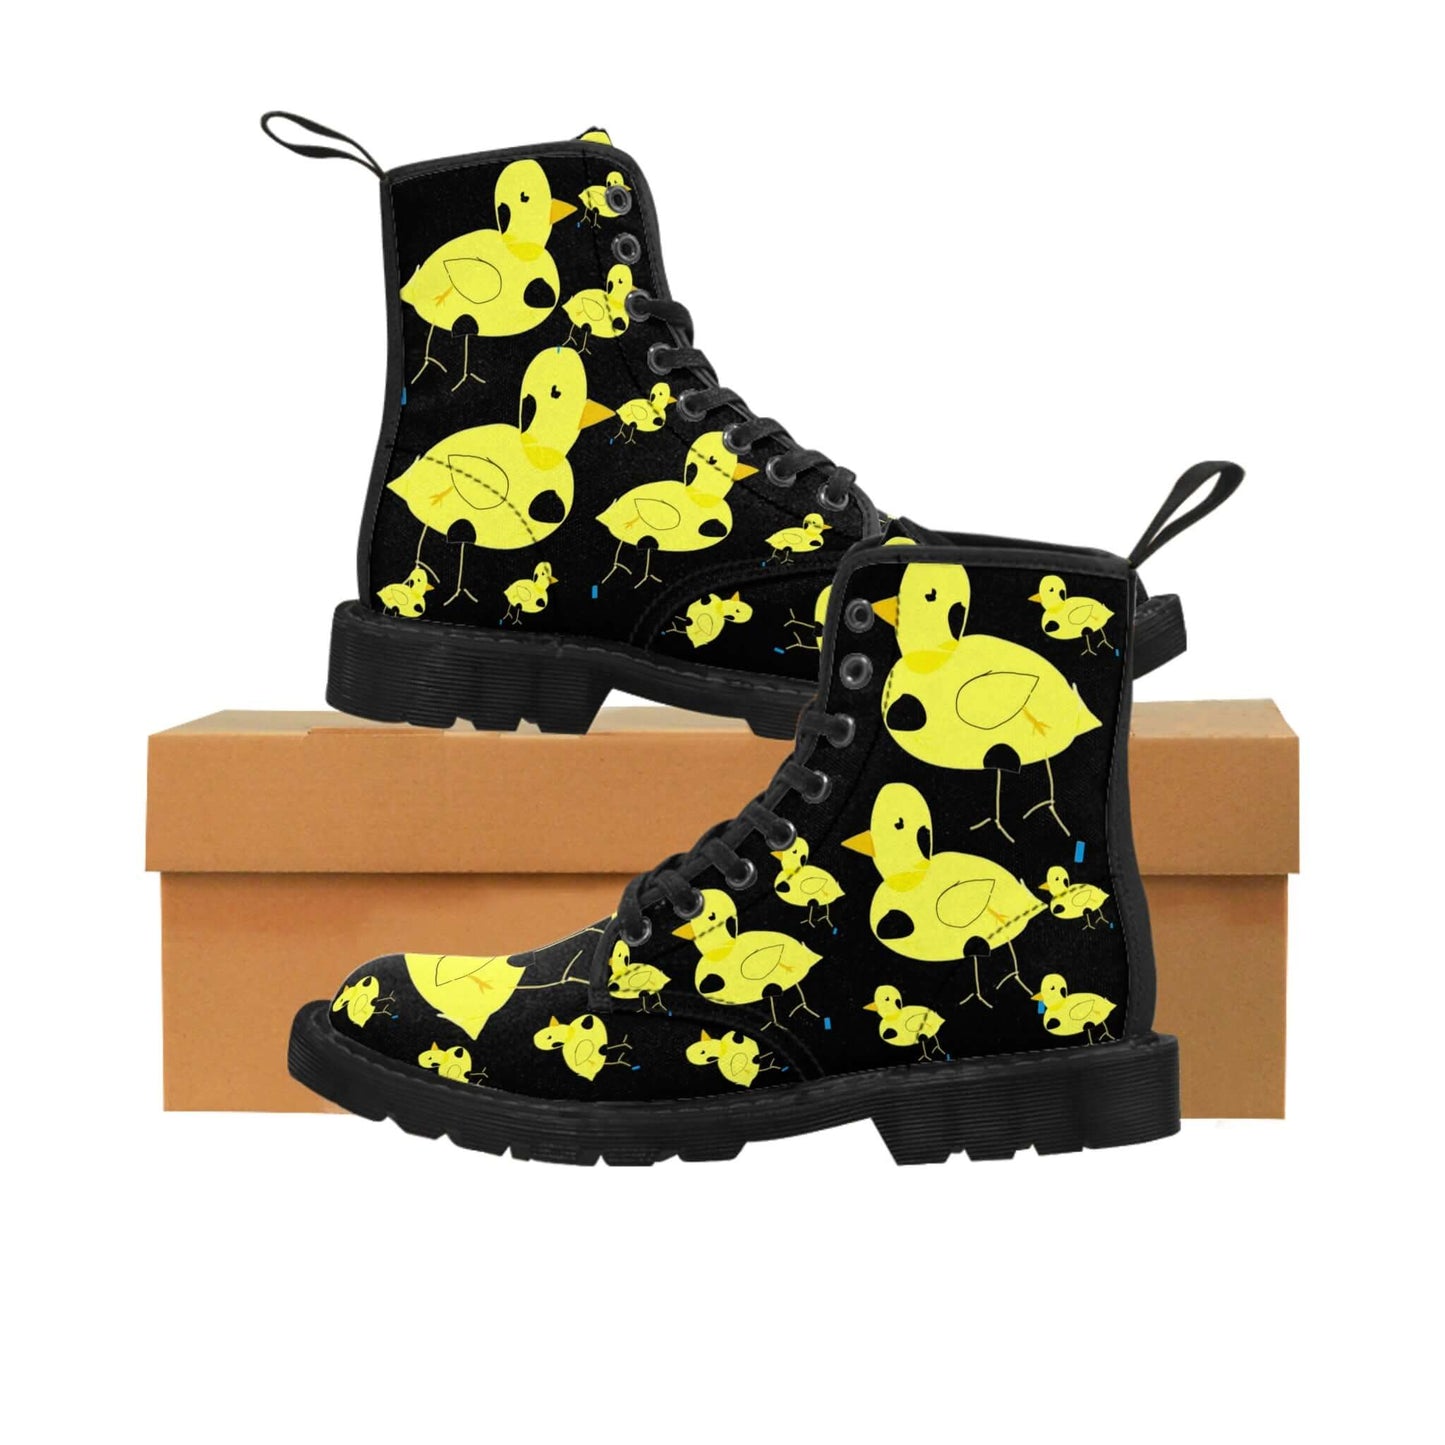 Canvas Boots with Myrtle the Four-Legged Chicken by D.B. print (women's sizing)